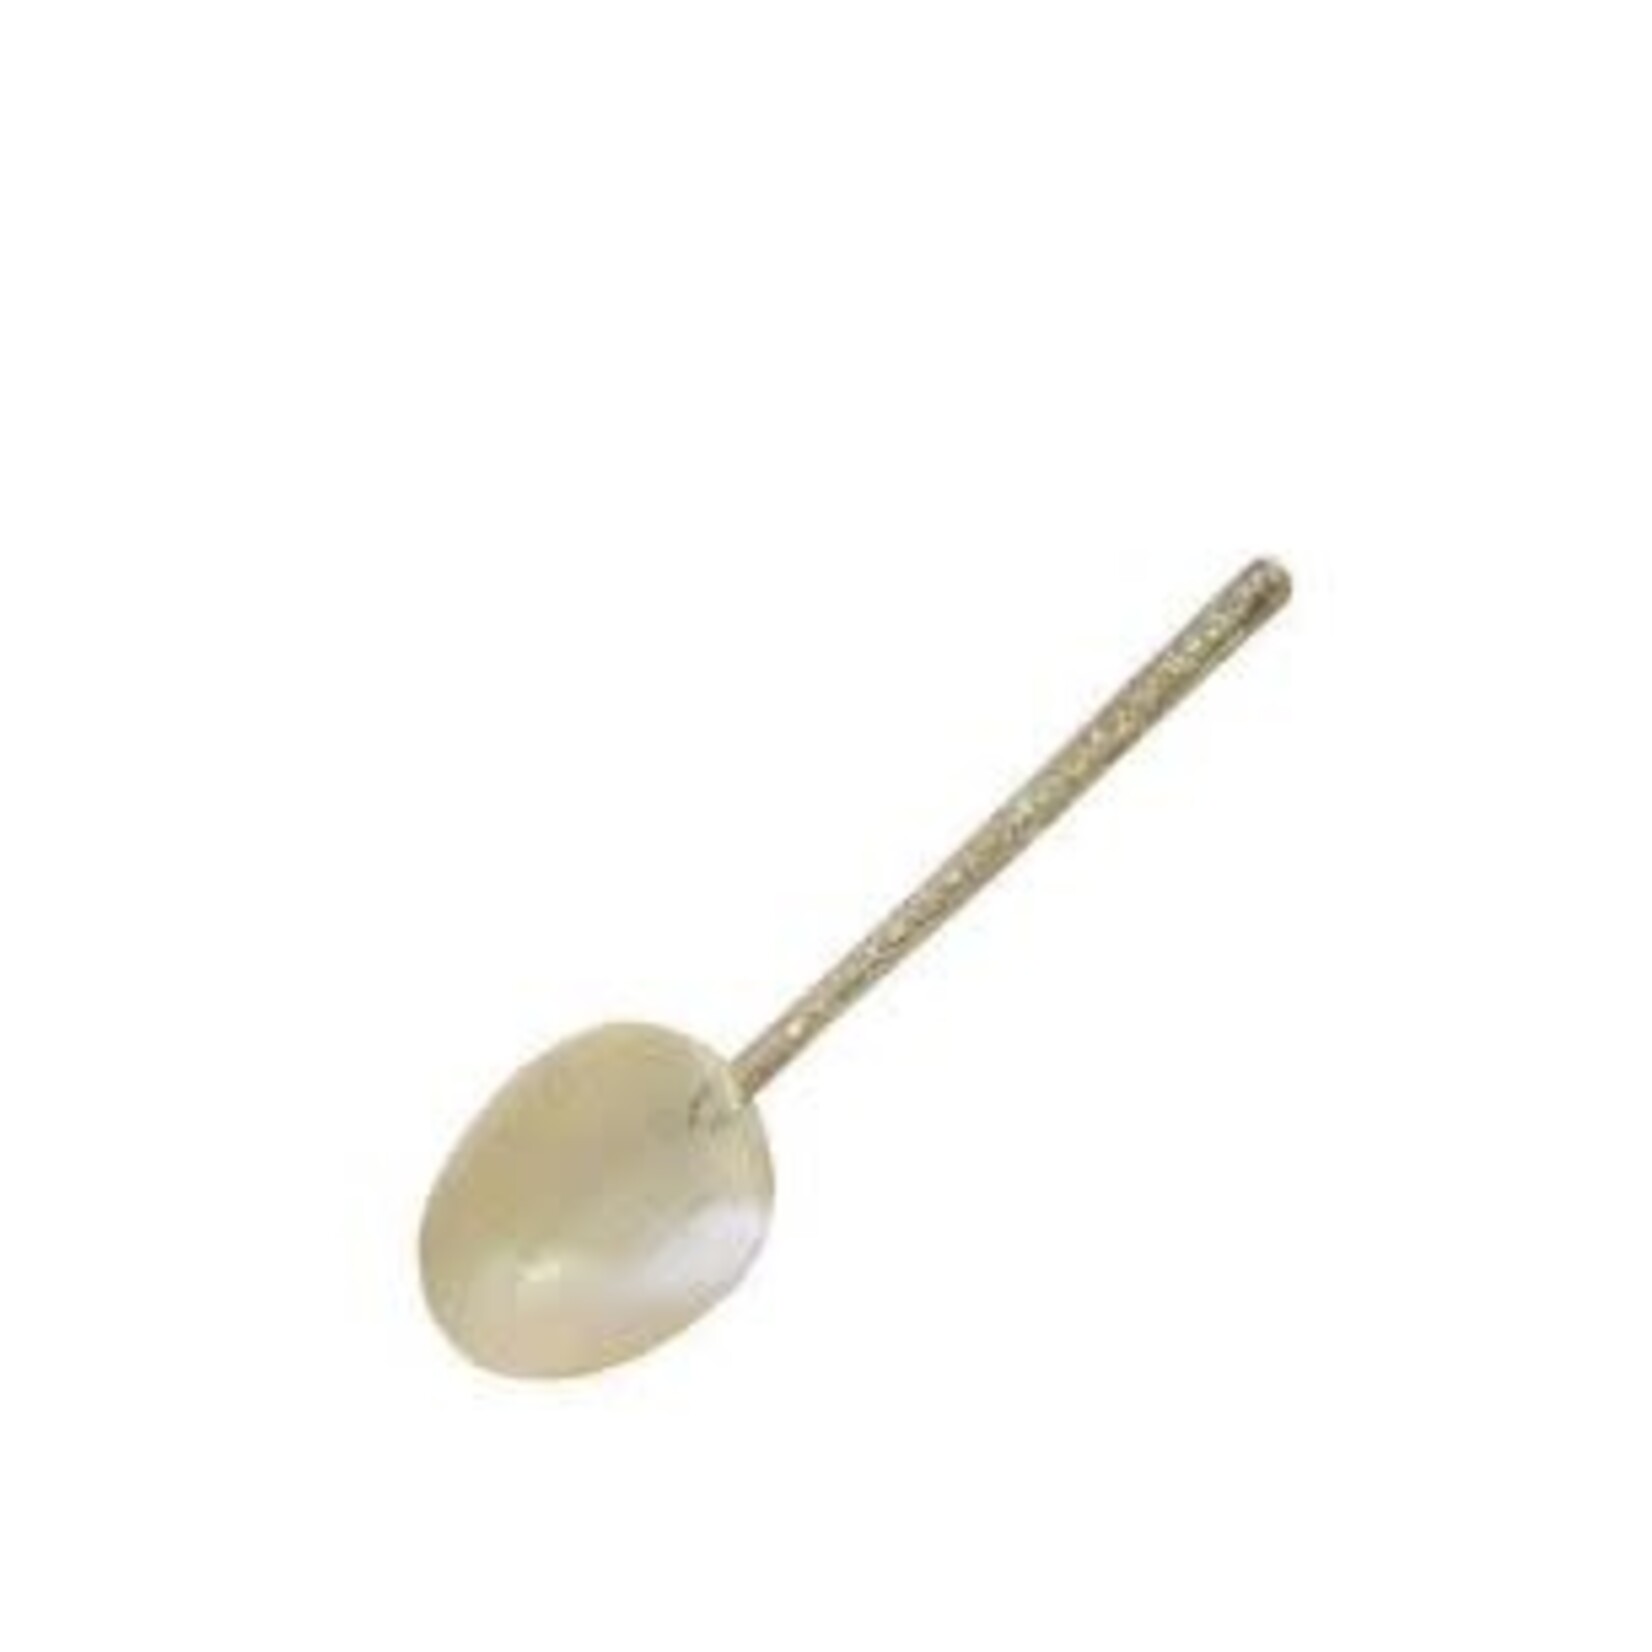 Frances Stoia Assoc Rivershell Spoon with Decorative Metal Handle